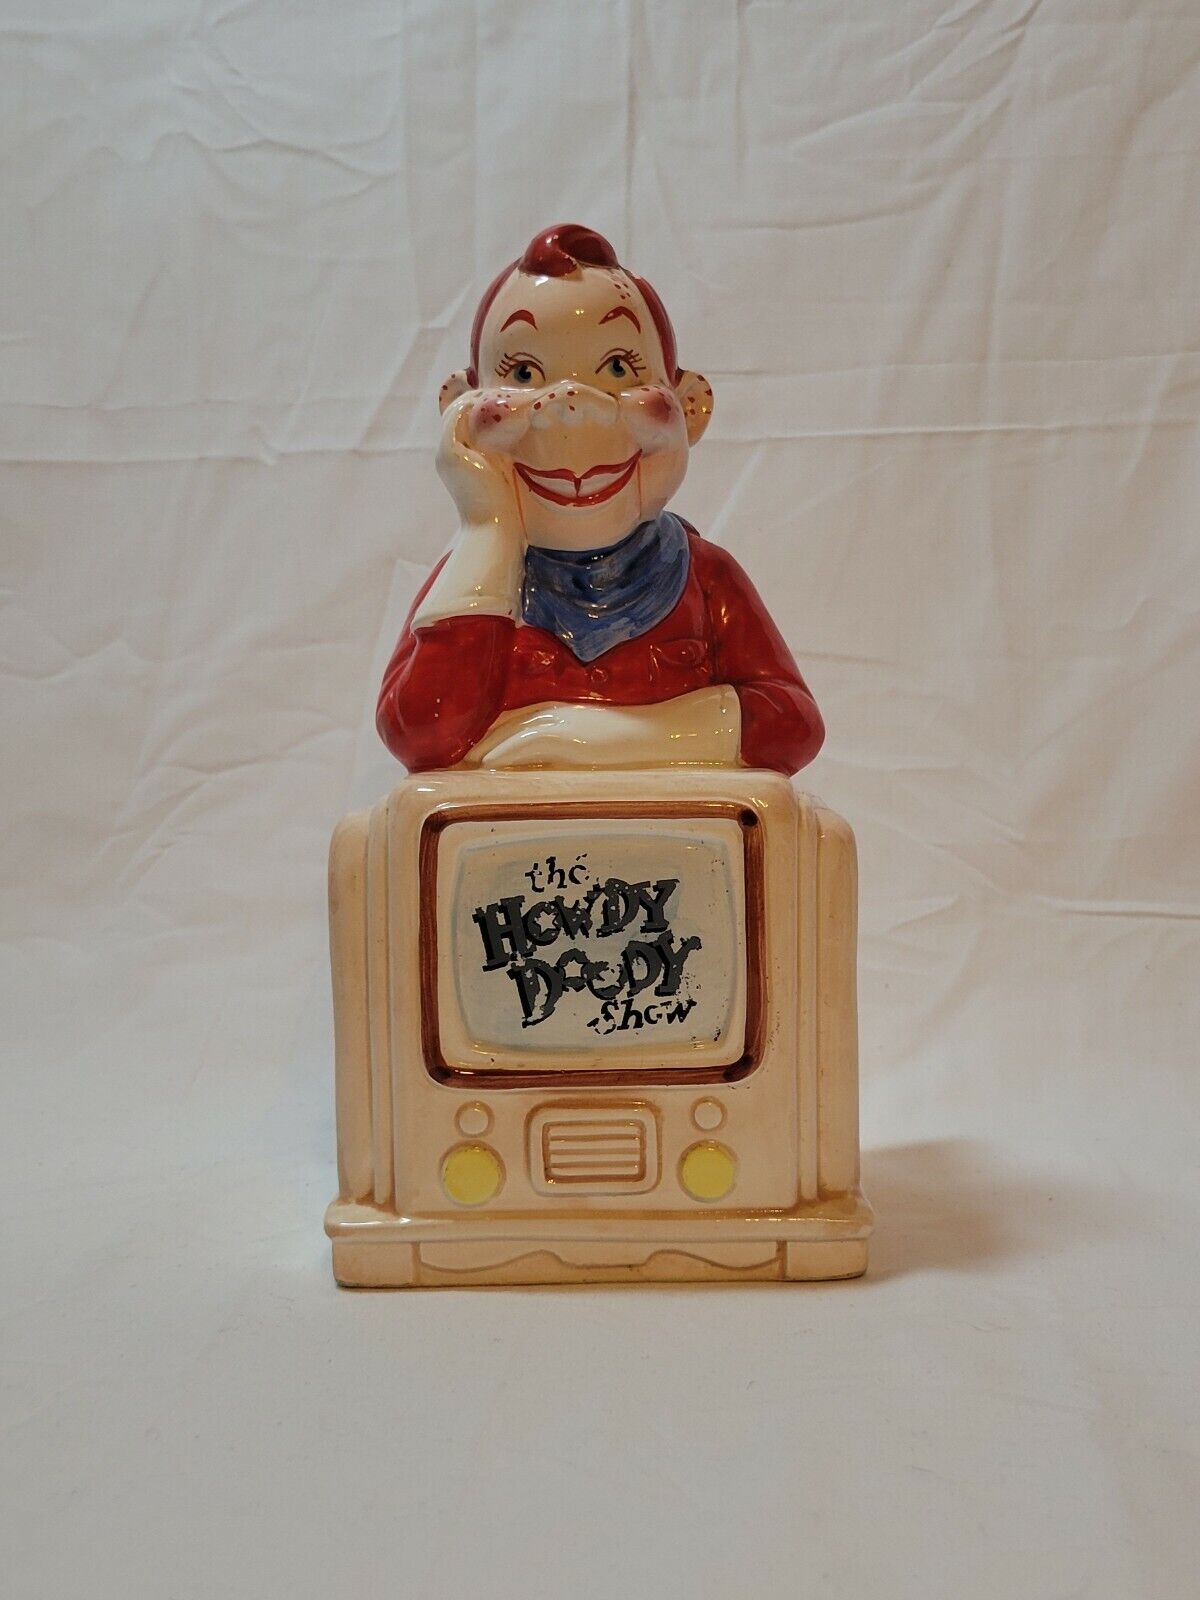 THE HOWDY DOODY SHOW Vandor 1980's King Features Character Bank, Used(With Plug)